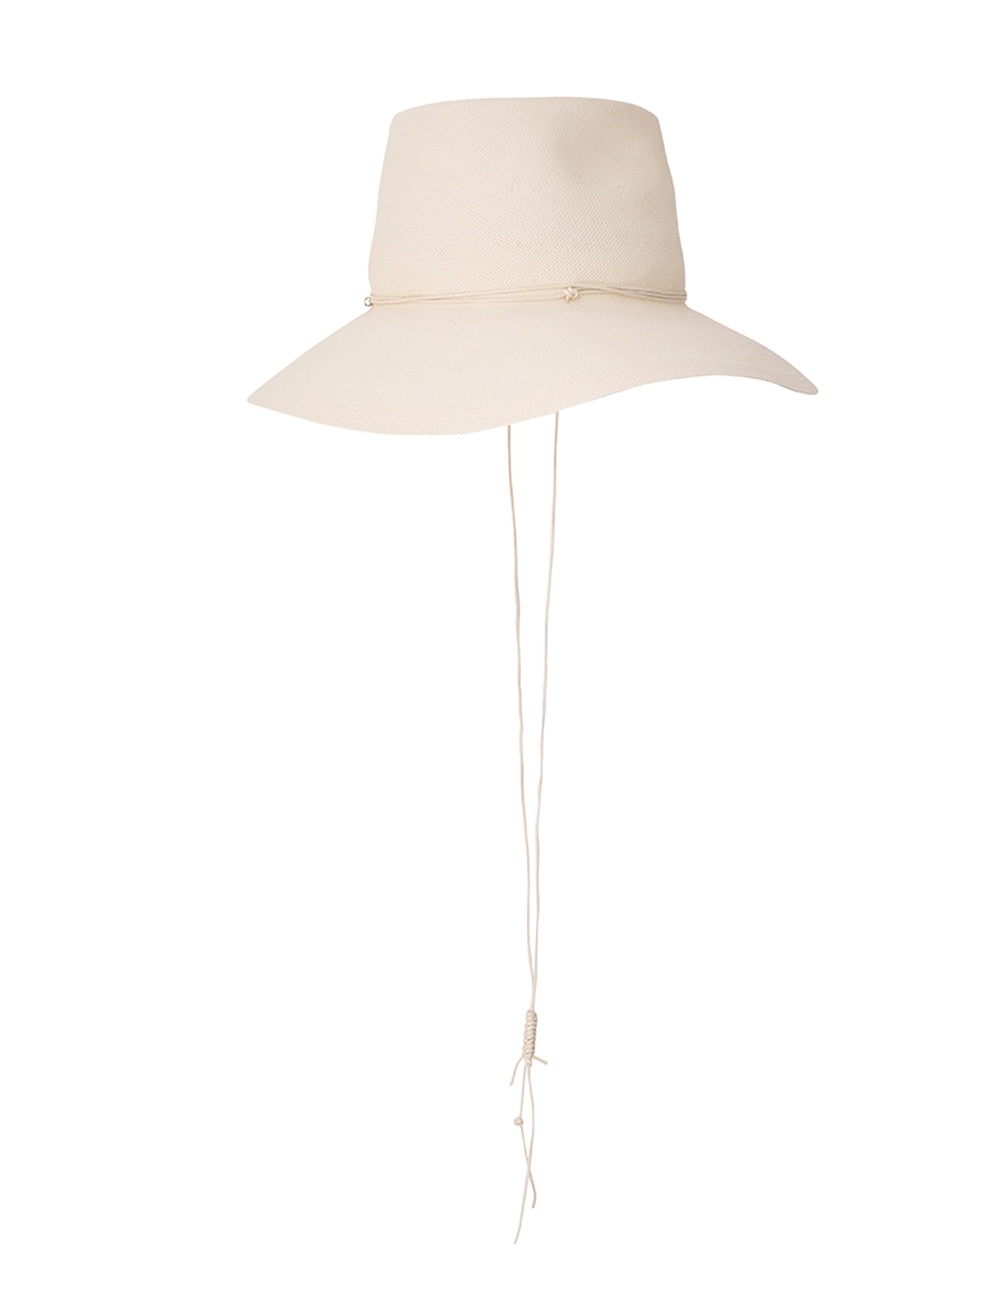 GLAZED STRAW COLLAPSIBLE HAT - 2